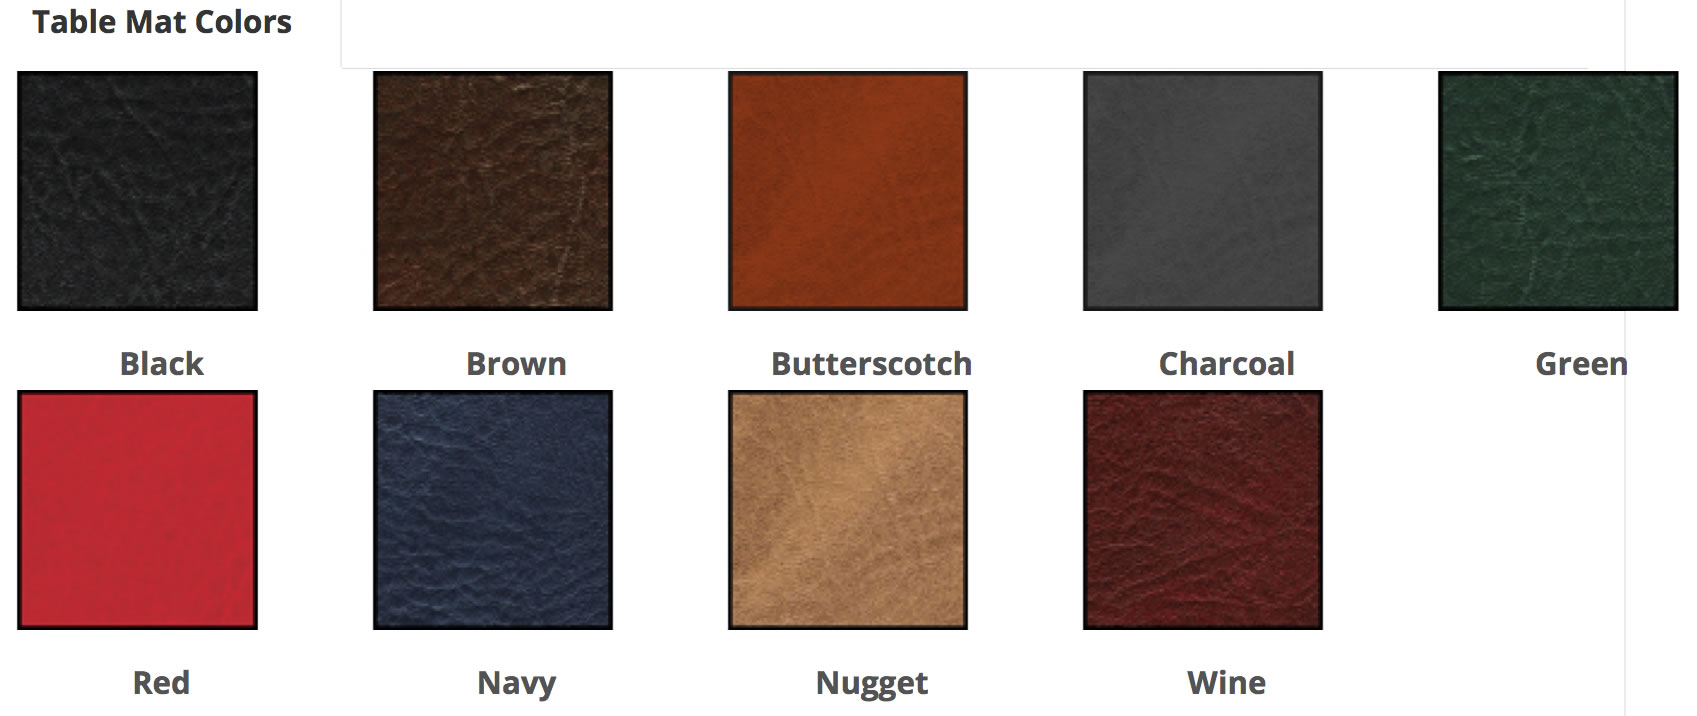 Color swatches for Country Club & Restaurant Table Mats.